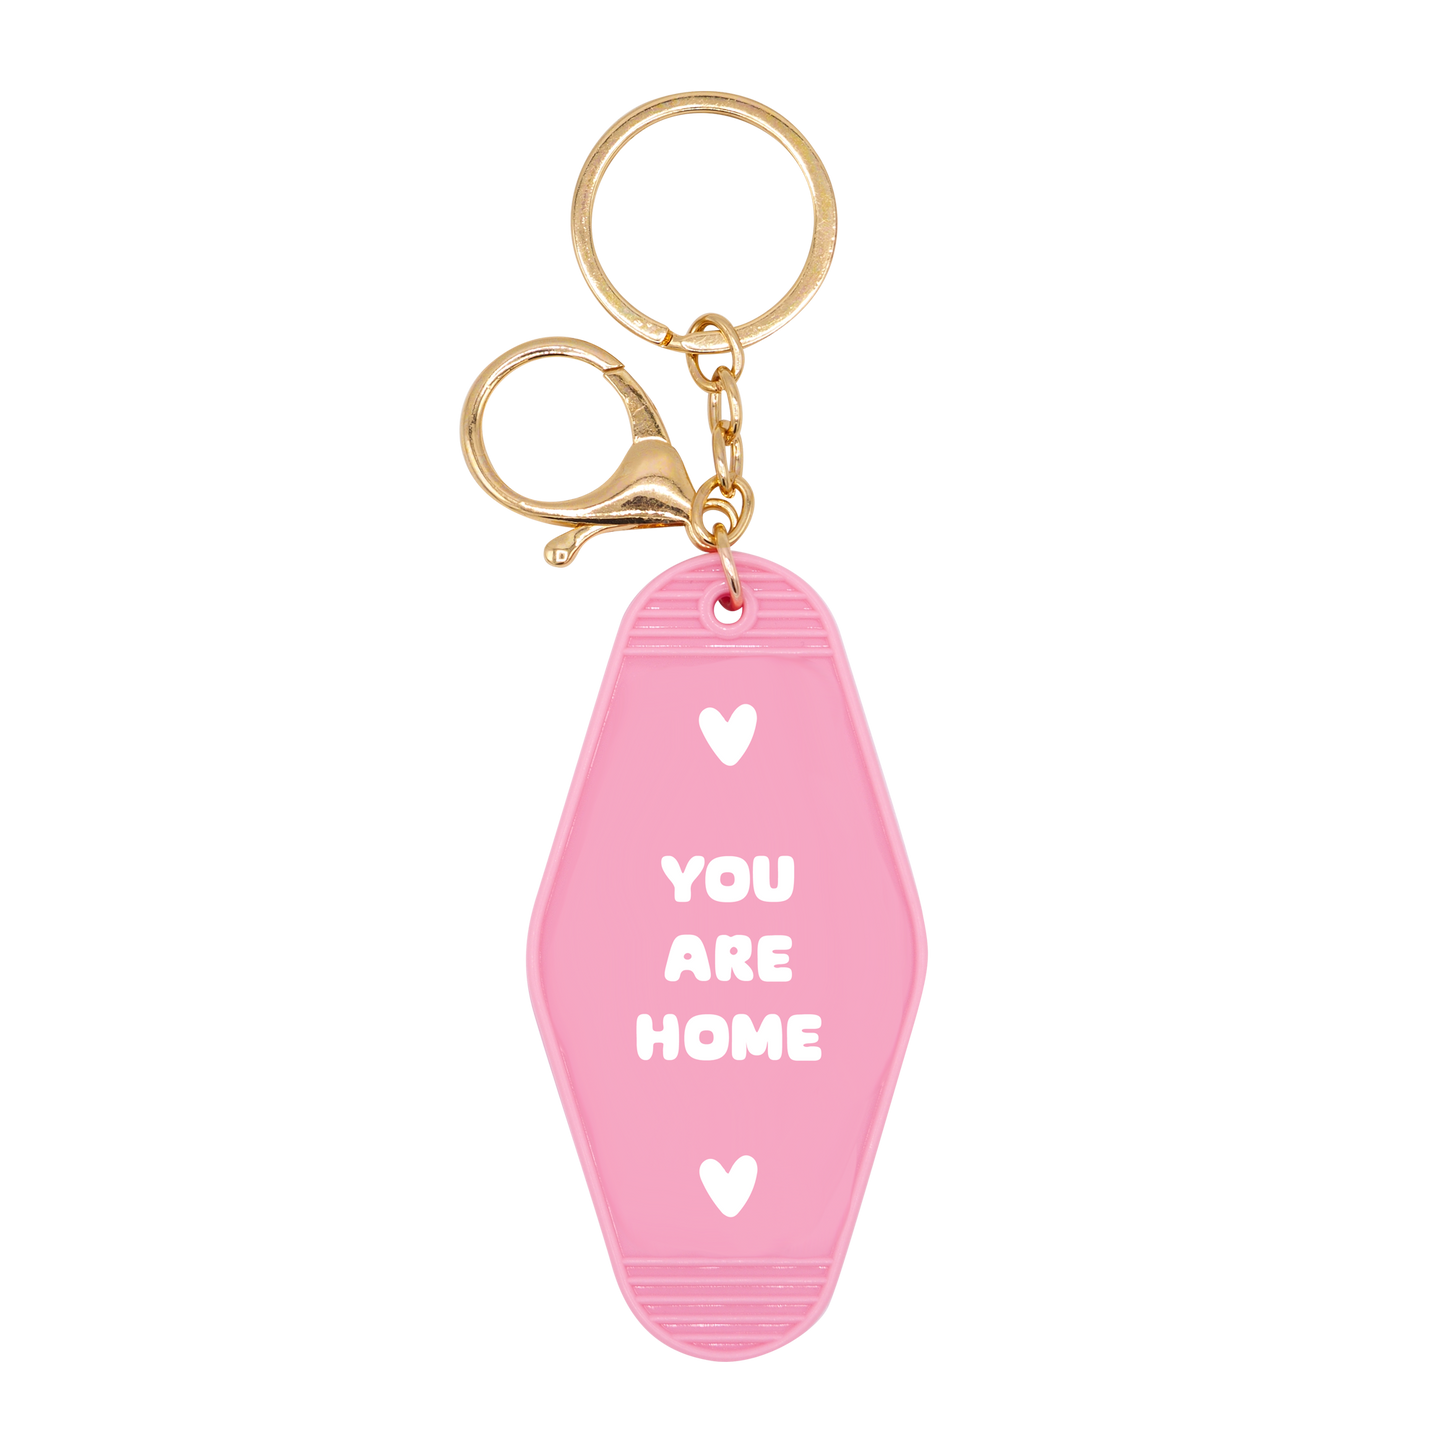 You Are Home Harry Styles Keychain